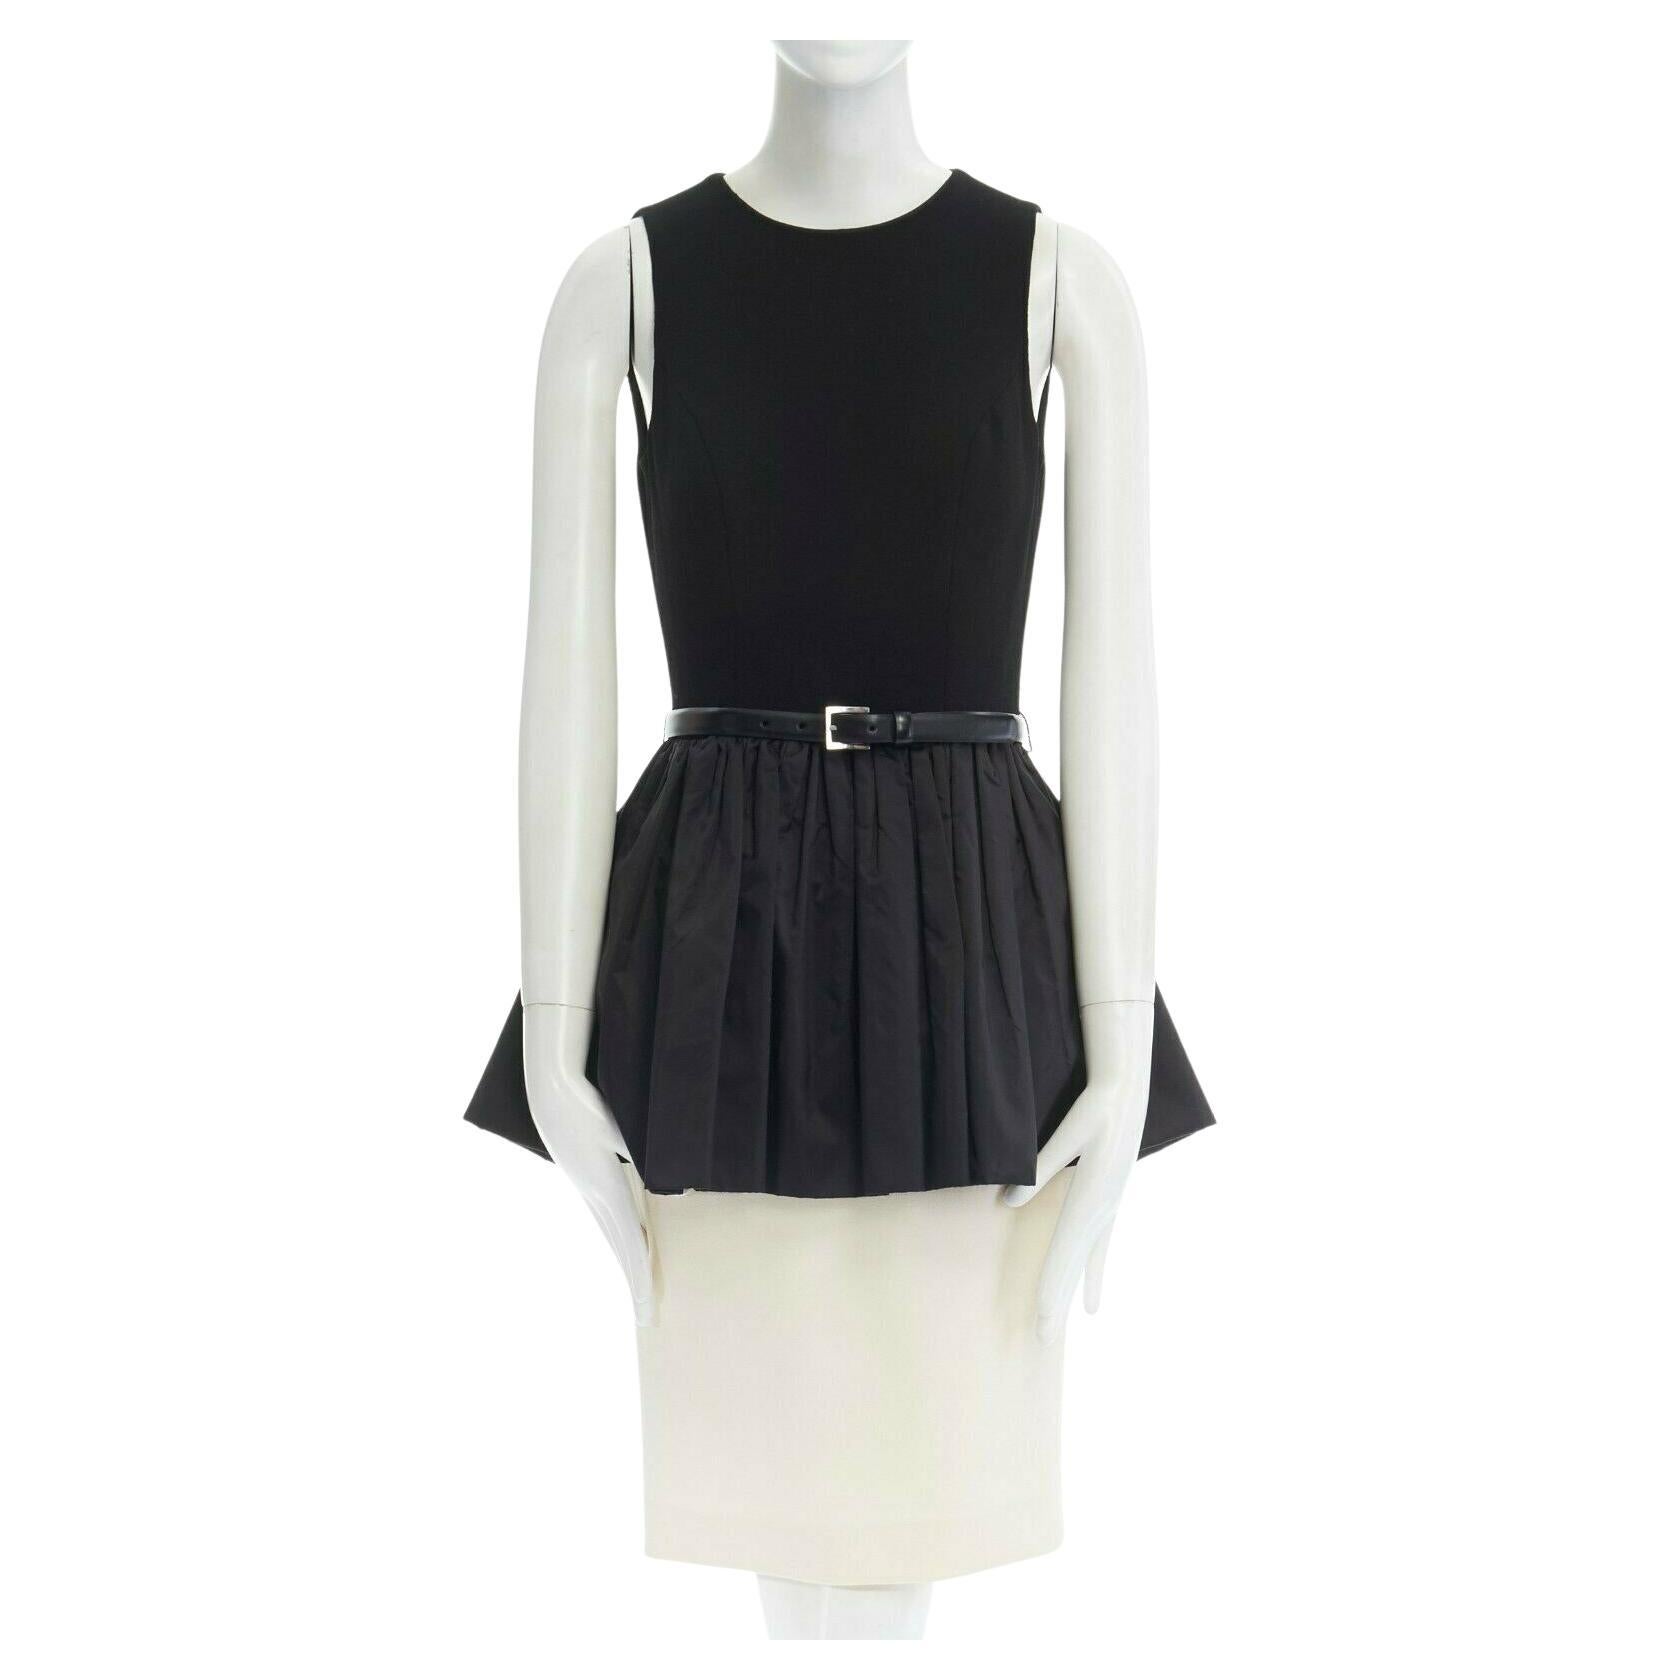 MICHAEL KORS COLLECTION black leather belted peplum white skirt dress US2 XS For Sale